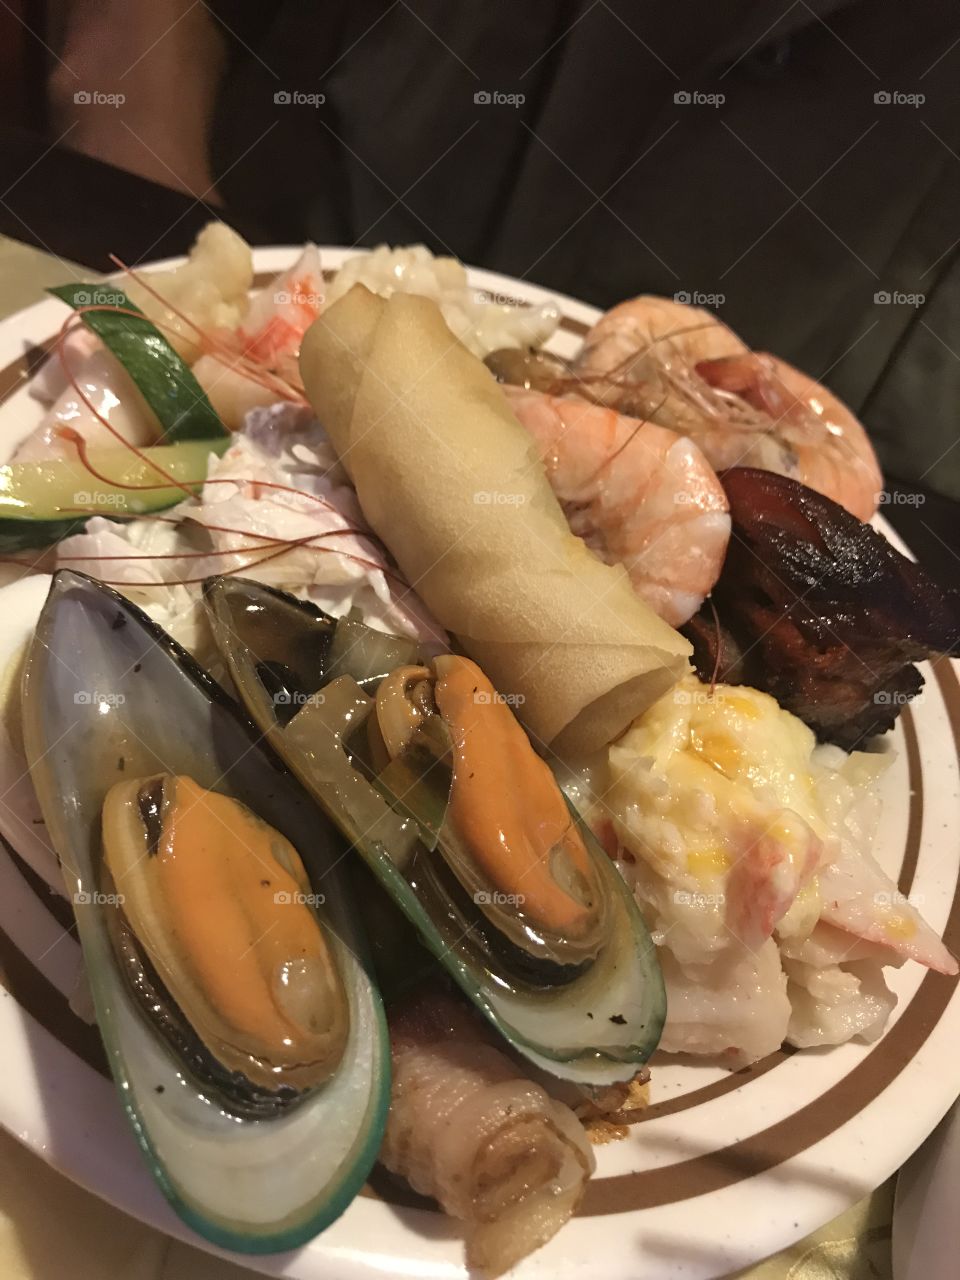 A yummy plate of seafood and Chinese food.